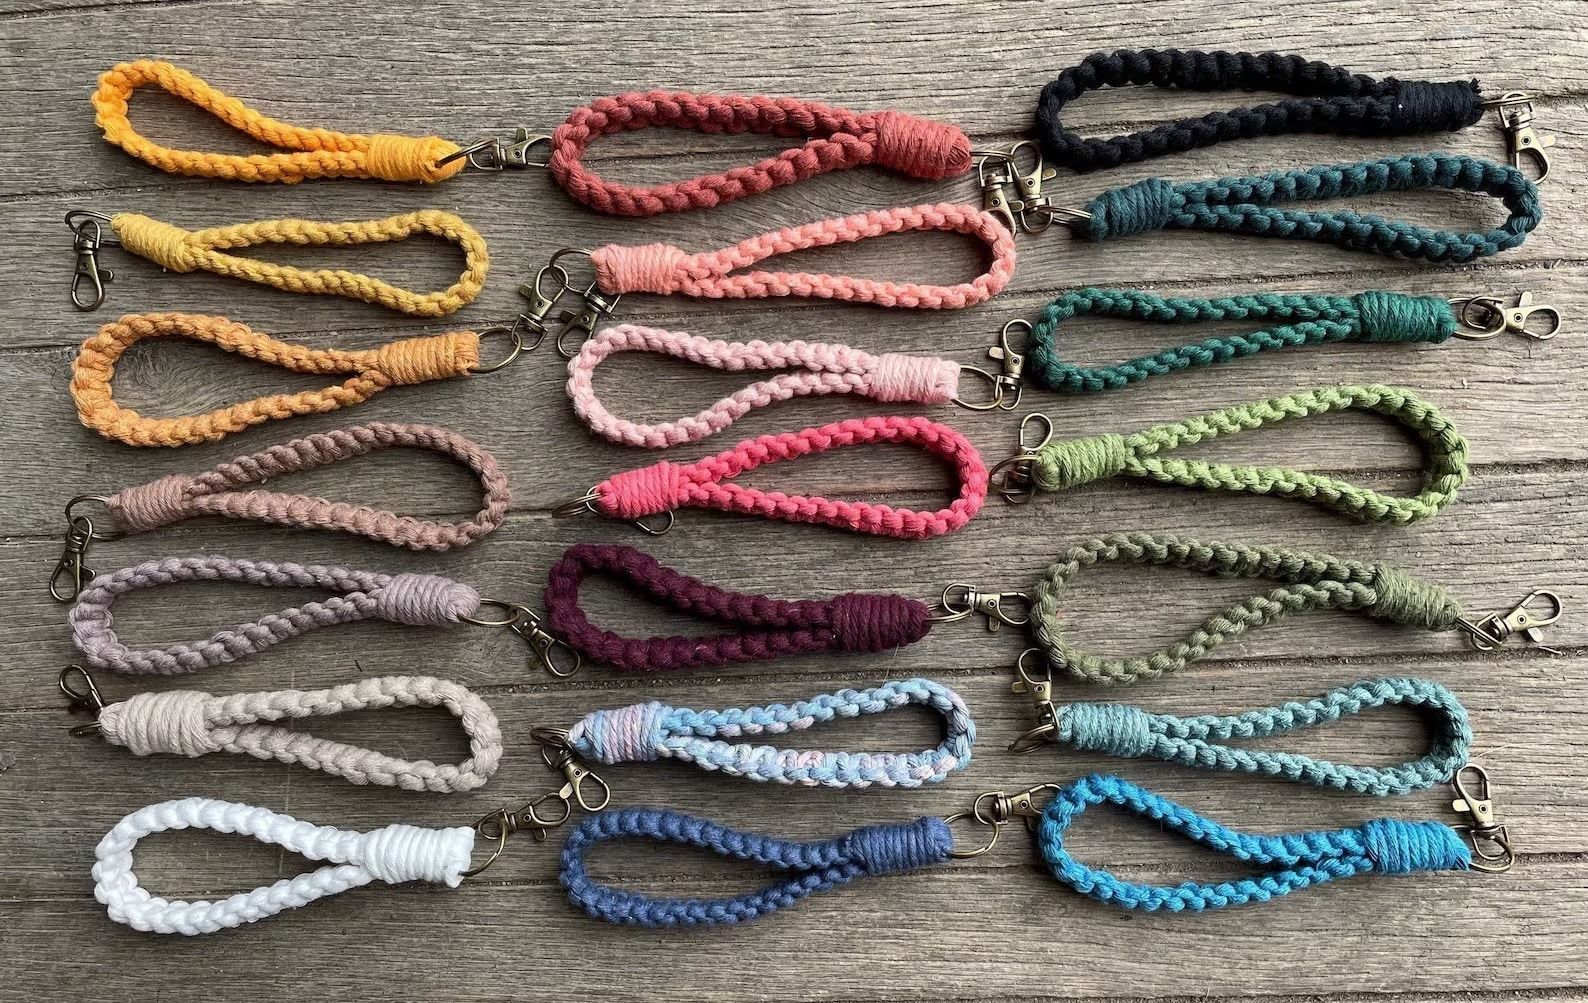 This Macrame Wristlet Keychain makes a great gift under $10